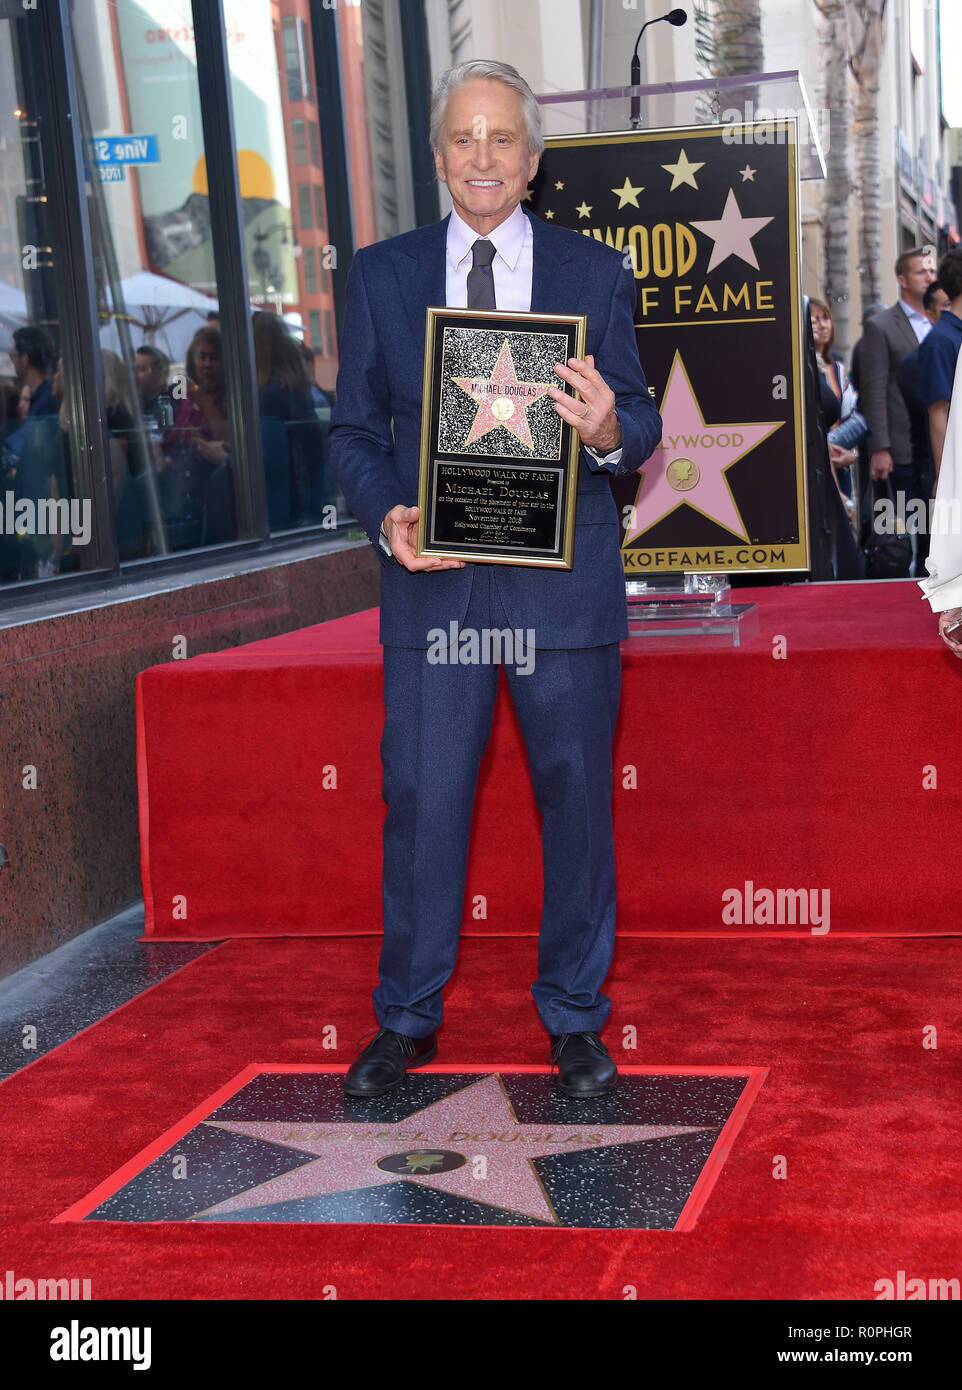 Hollywood, California, USA. 6th Nov, 2018. Michael Douglas joins the Walk of Fame in honoring Michael Douglas with a star in Hollywood. Credit: Lisa O'Connor/ZUMA Wire/Alamy Live News Stock Photo